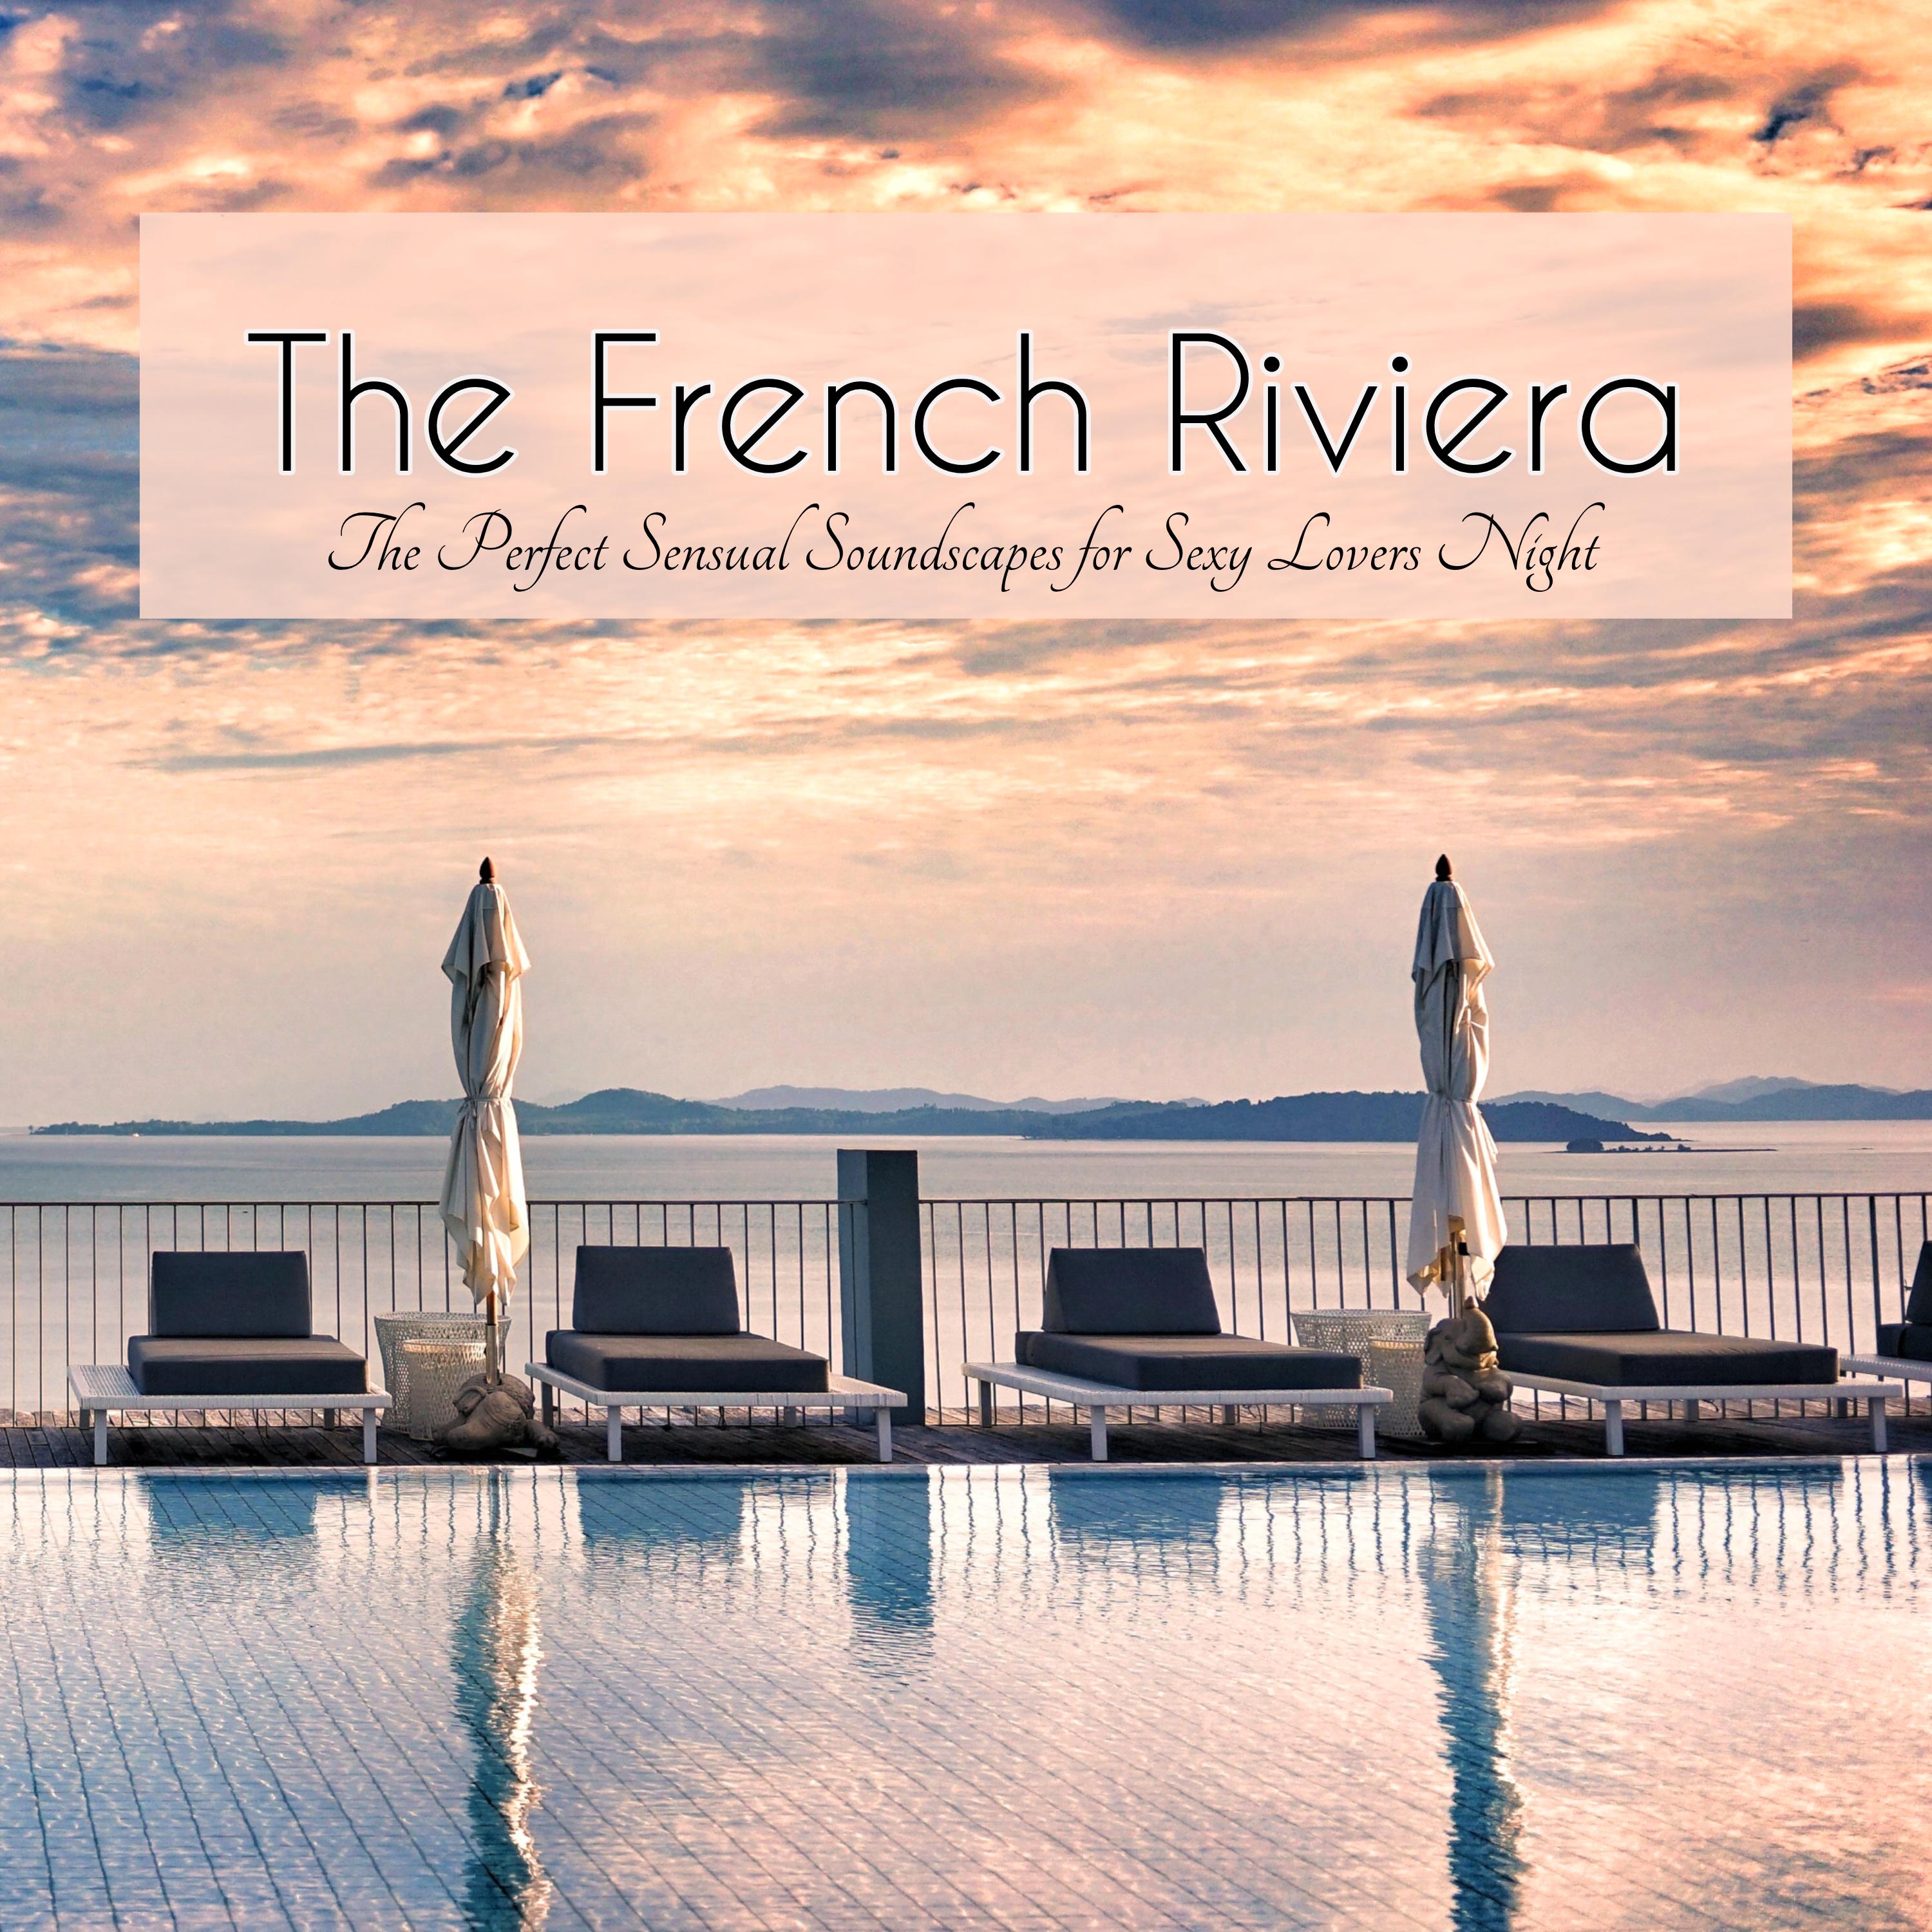 The French Riviera – The Perfect Sensual Soundscapes for **** Lovers Night